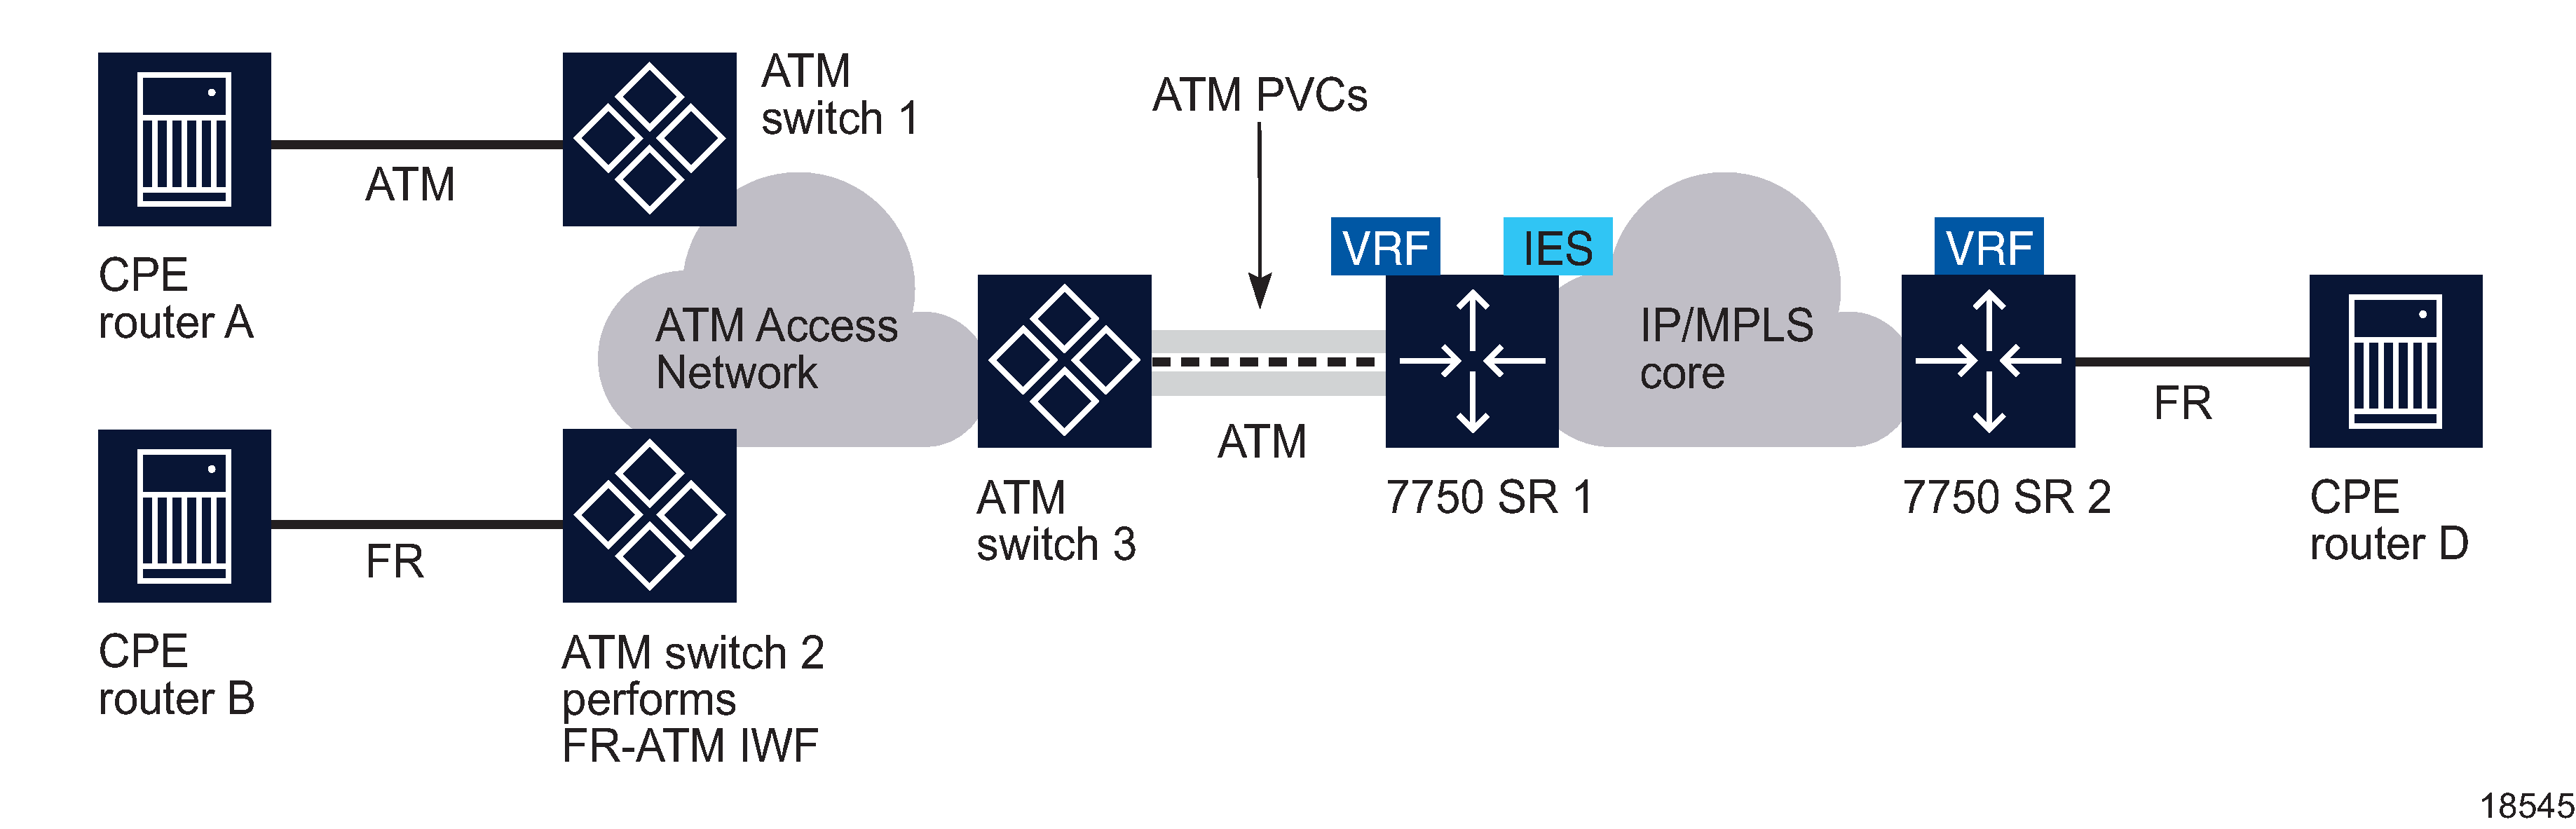 ATM SAP network connection to a VPRN